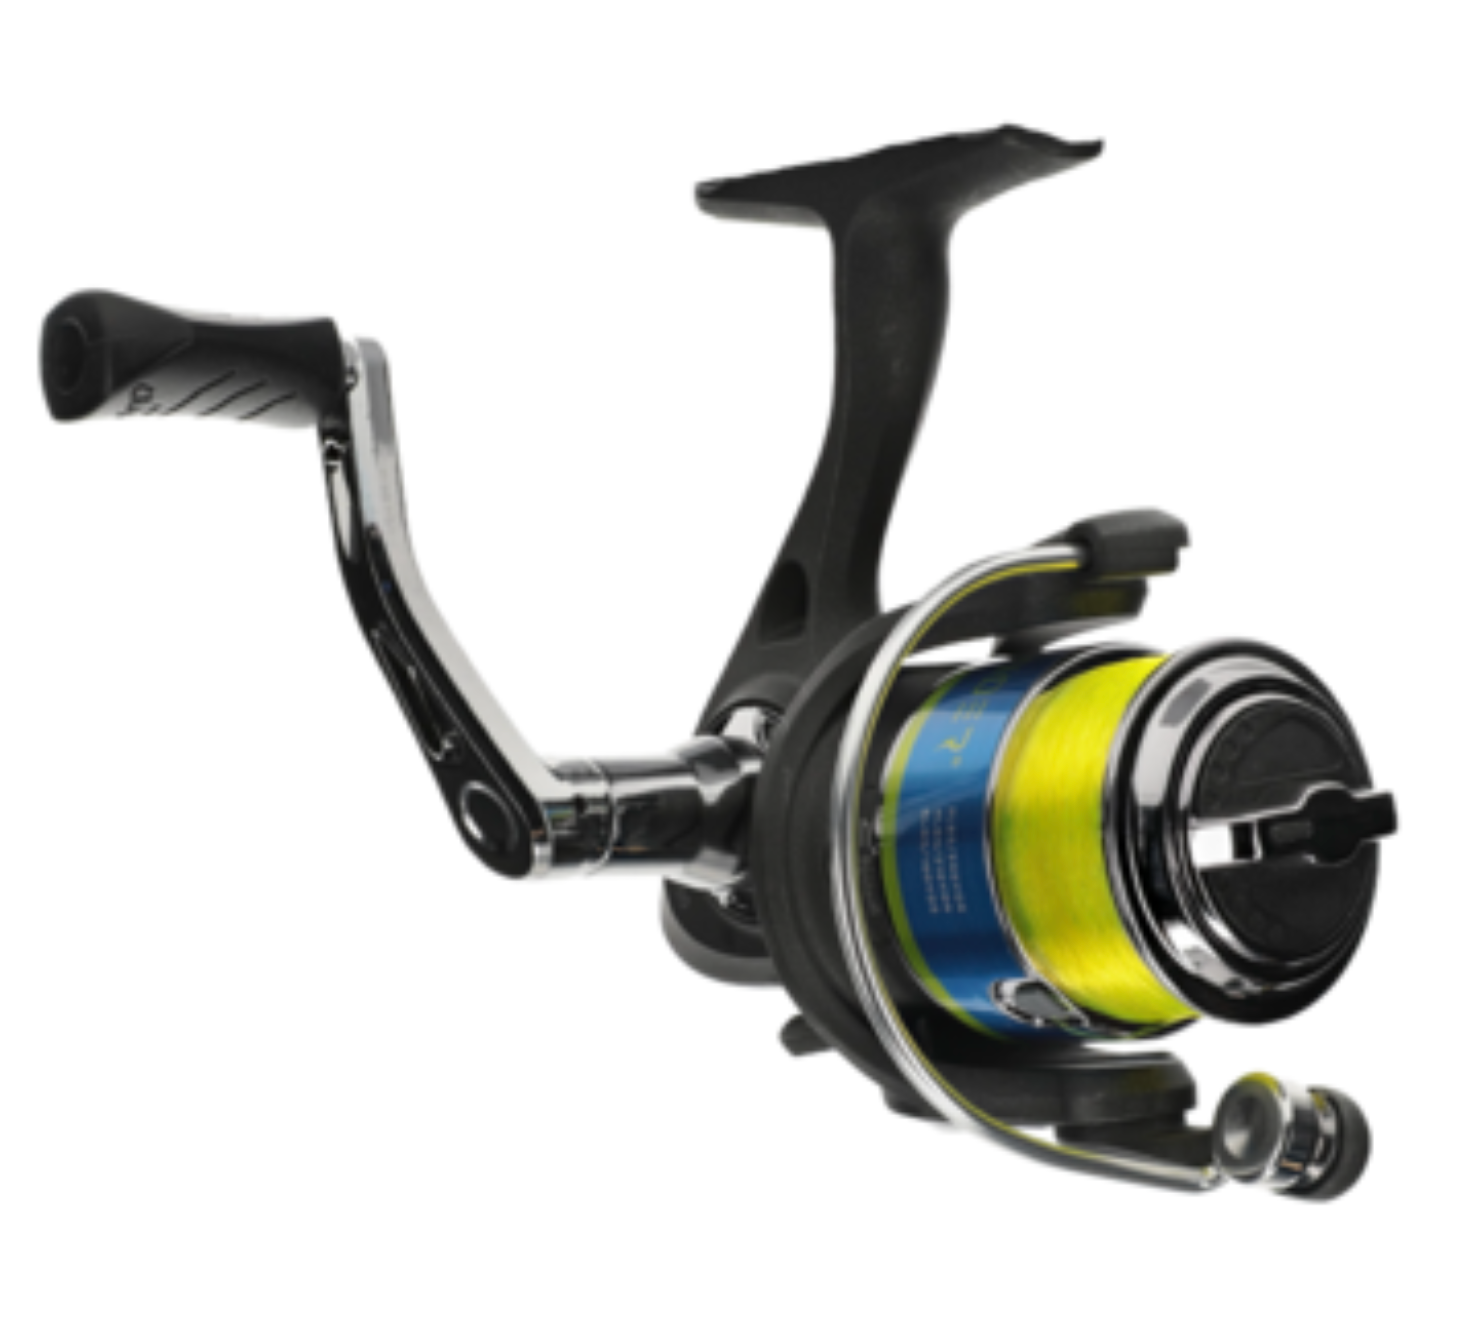 LEW'S CRAPPIE THUNDER 100 SPINNING REEL 5.1 2BB – Grants Fishing Company